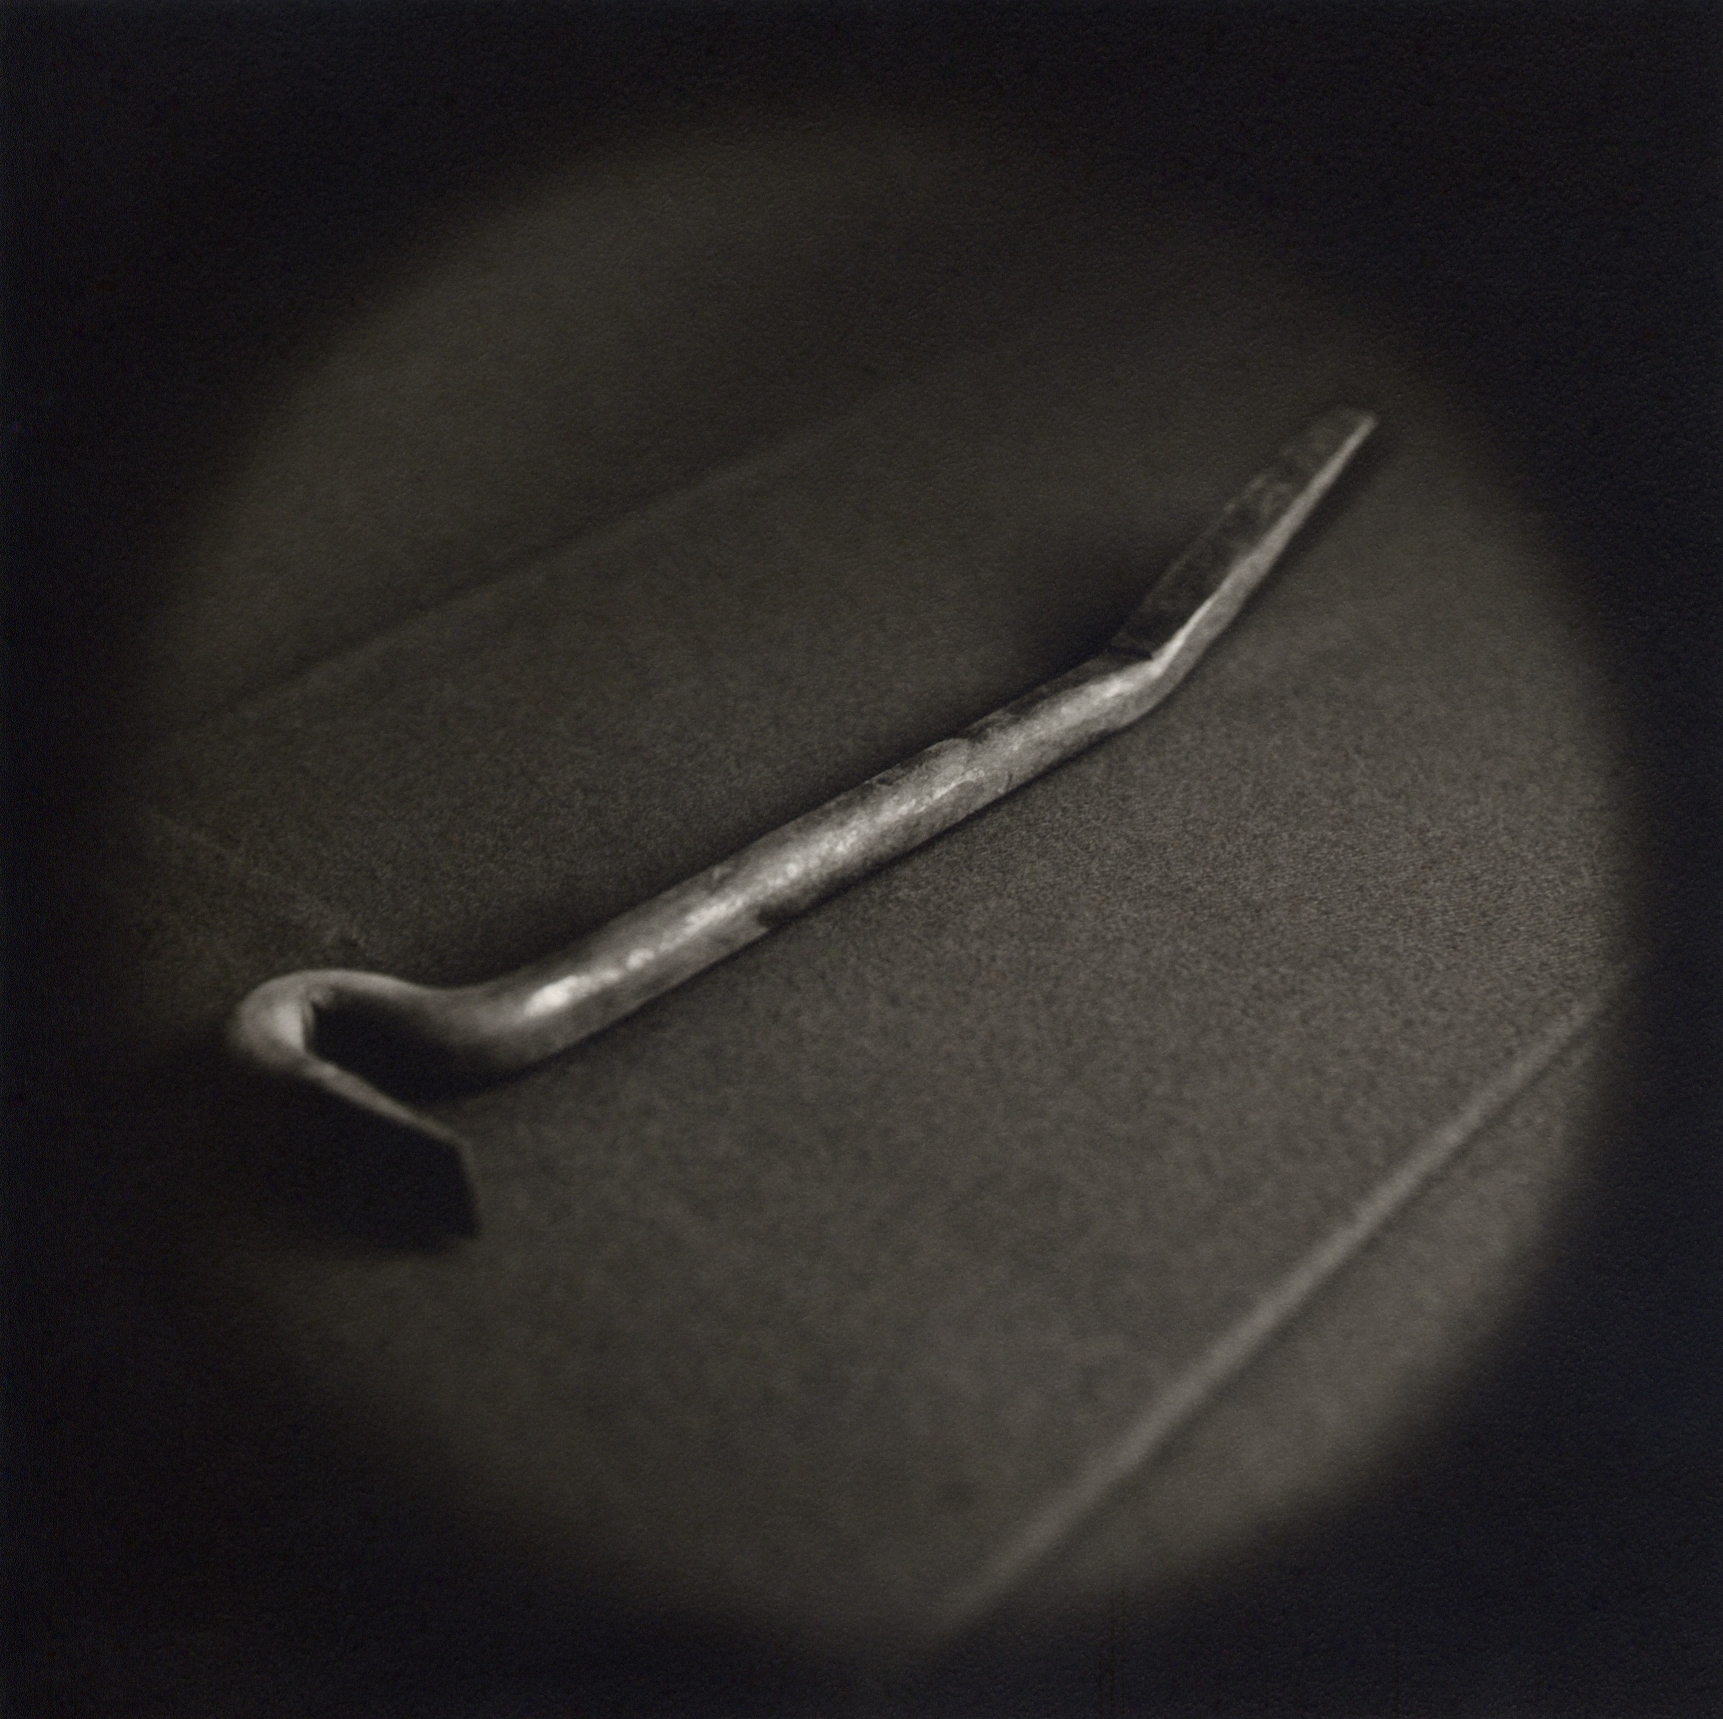   Crowbar, tool used to force entry    Toned gelatin silver print.   16 x 16 in. (40 x 40 cm.) 